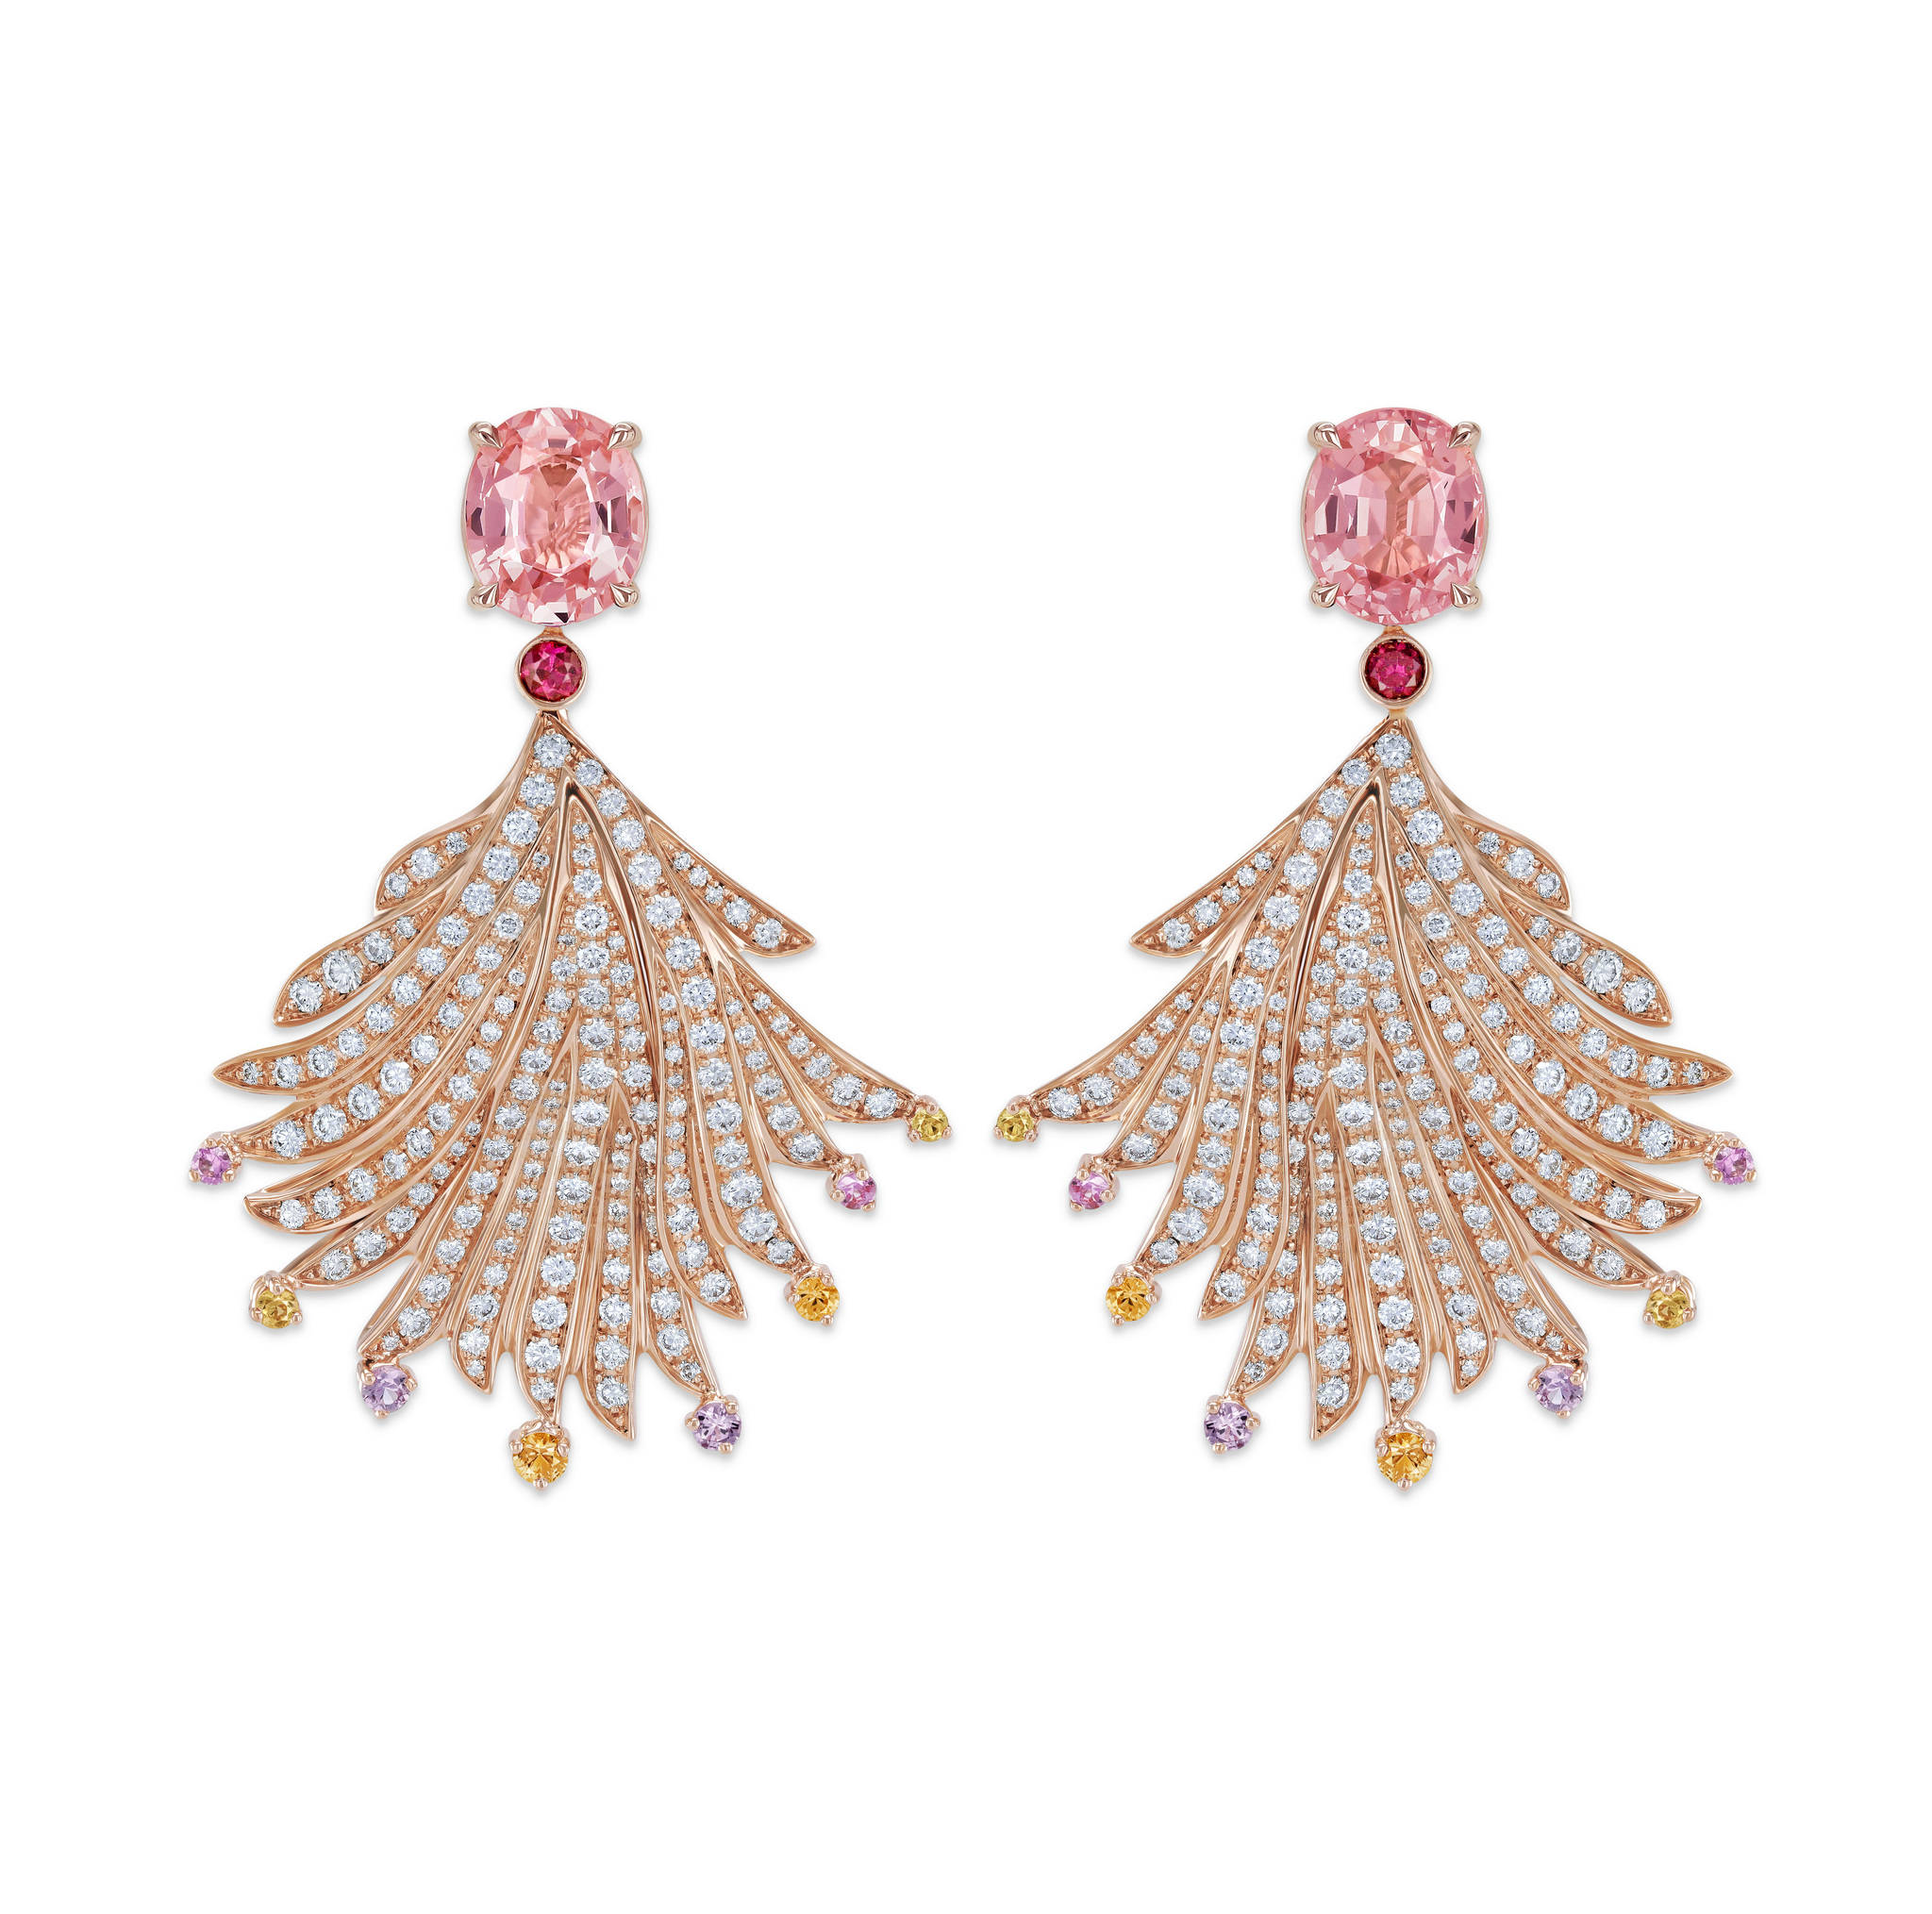 Earrings with padparadscha sapphires